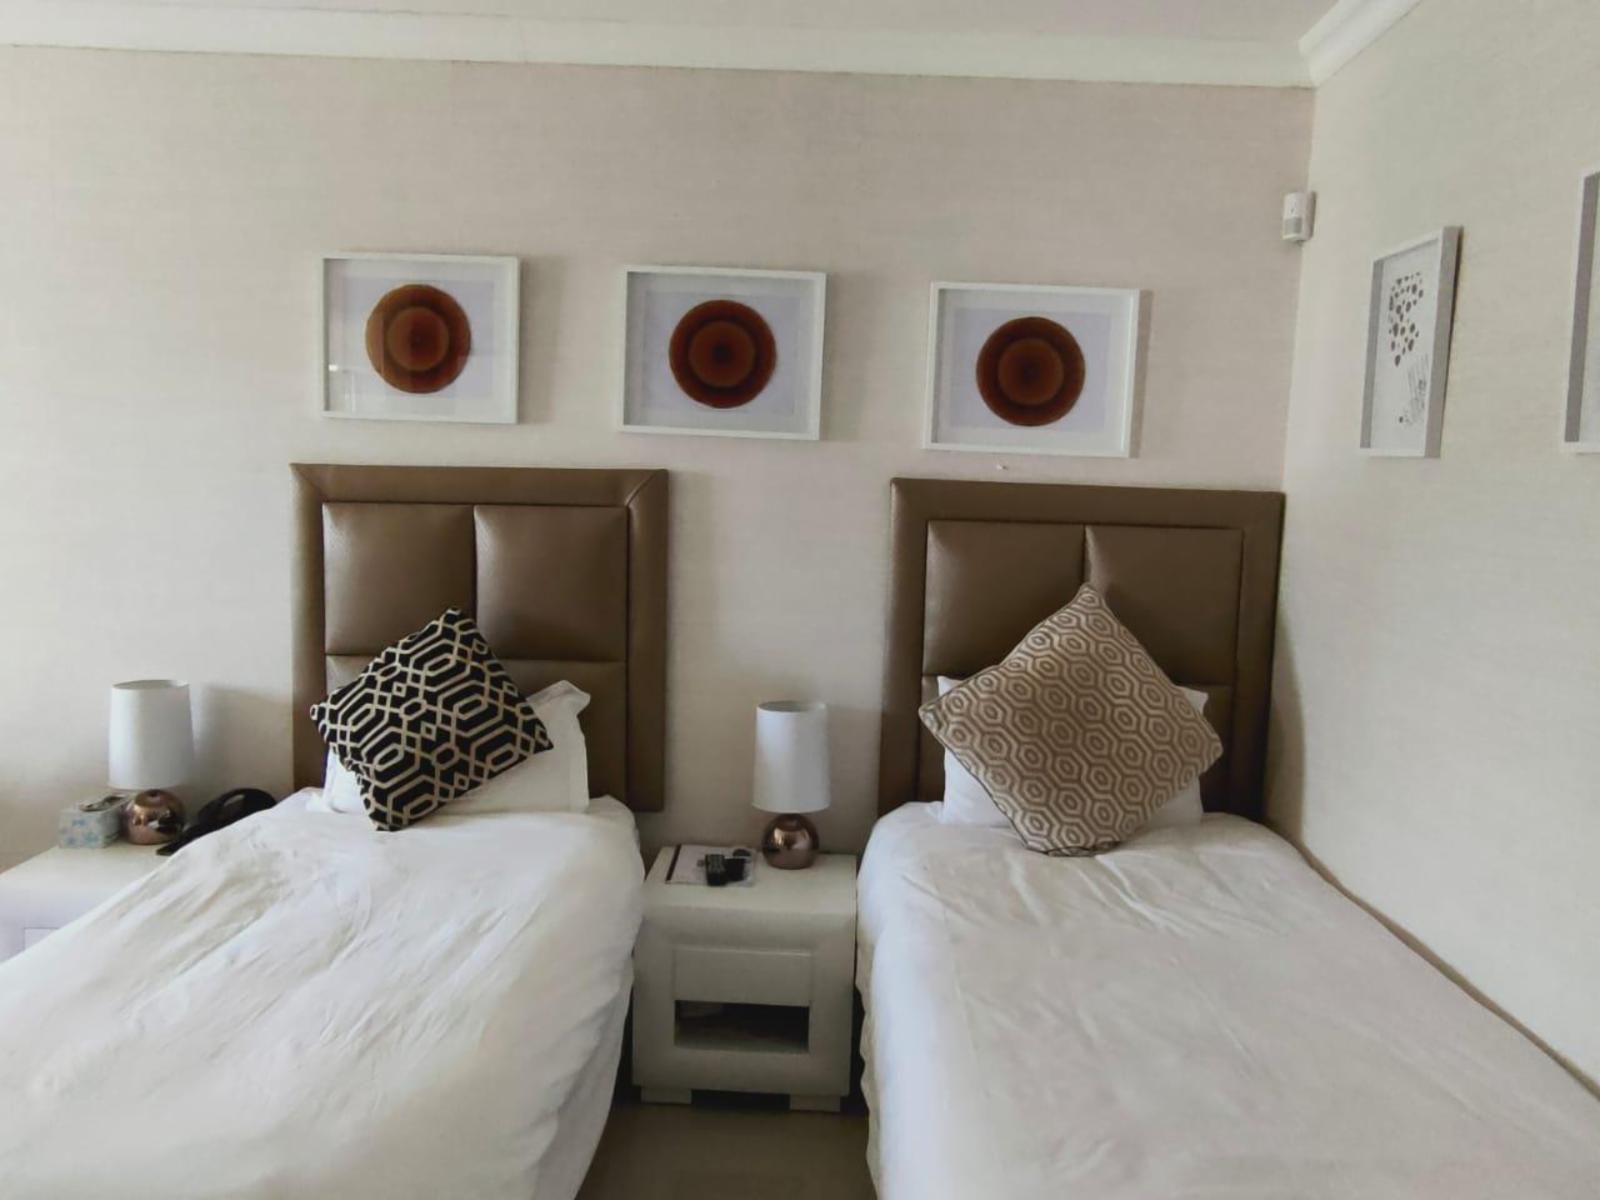 Cashmere Suites Cotswold Port Elizabeth Eastern Cape South Africa Unsaturated, Bedroom